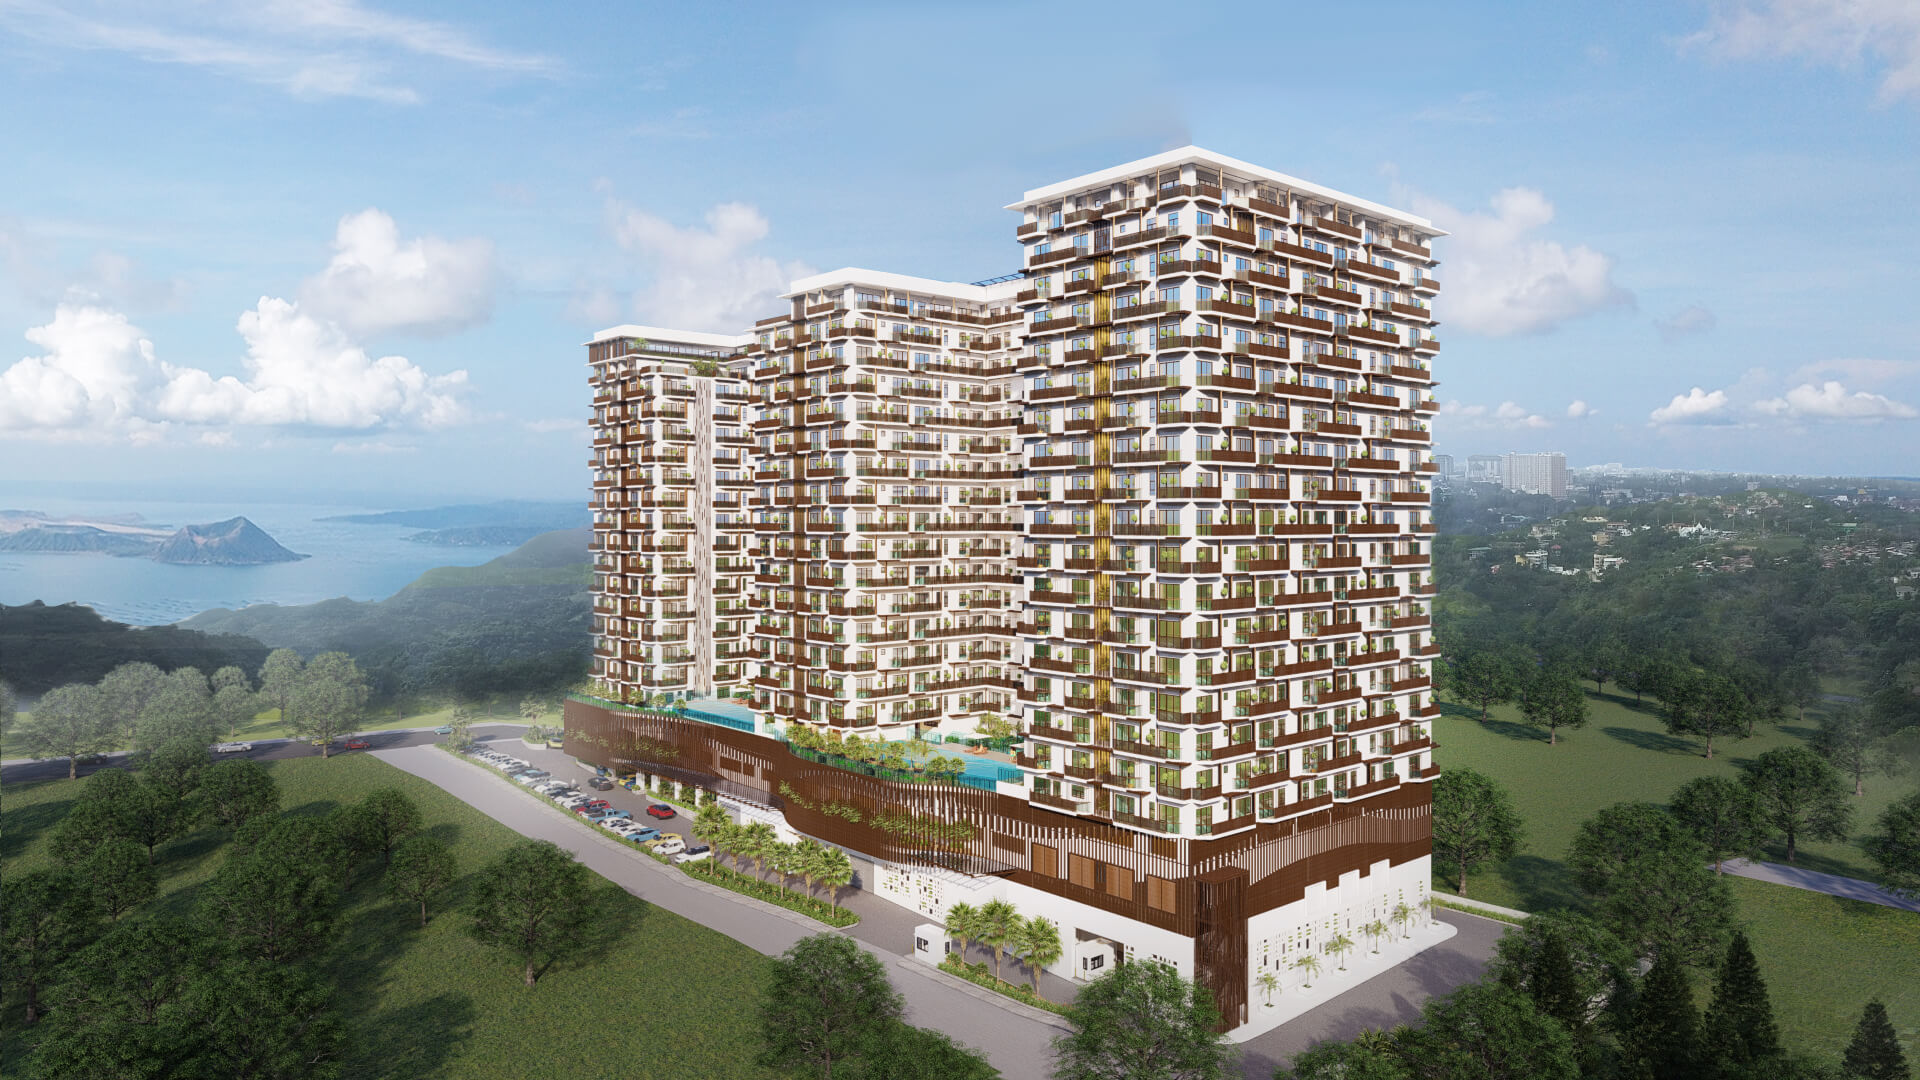 Investing in Wellness in one of the property offerings in Tagaytay: One Tolentino East Residences